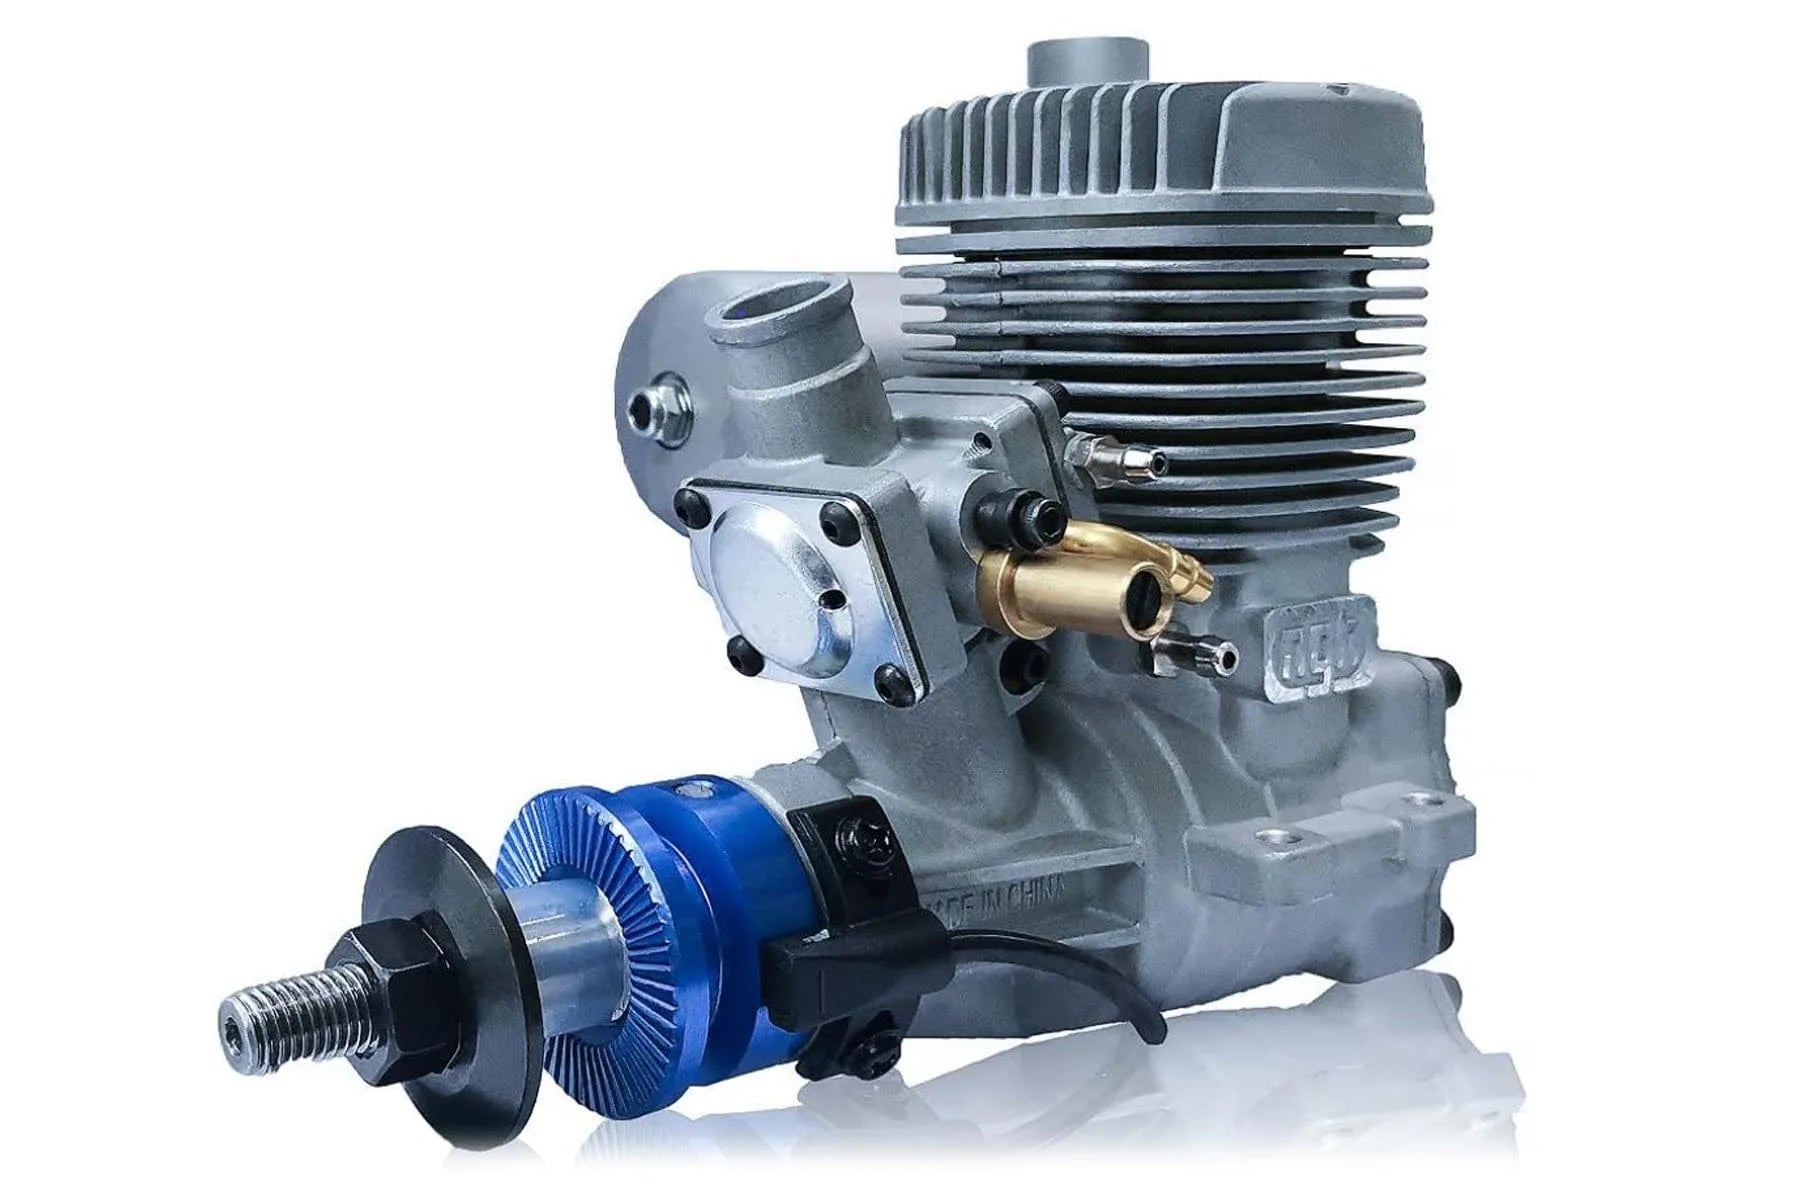 NGH GT17-Pro 17cc Two-Stroke Engine NGH-GT17